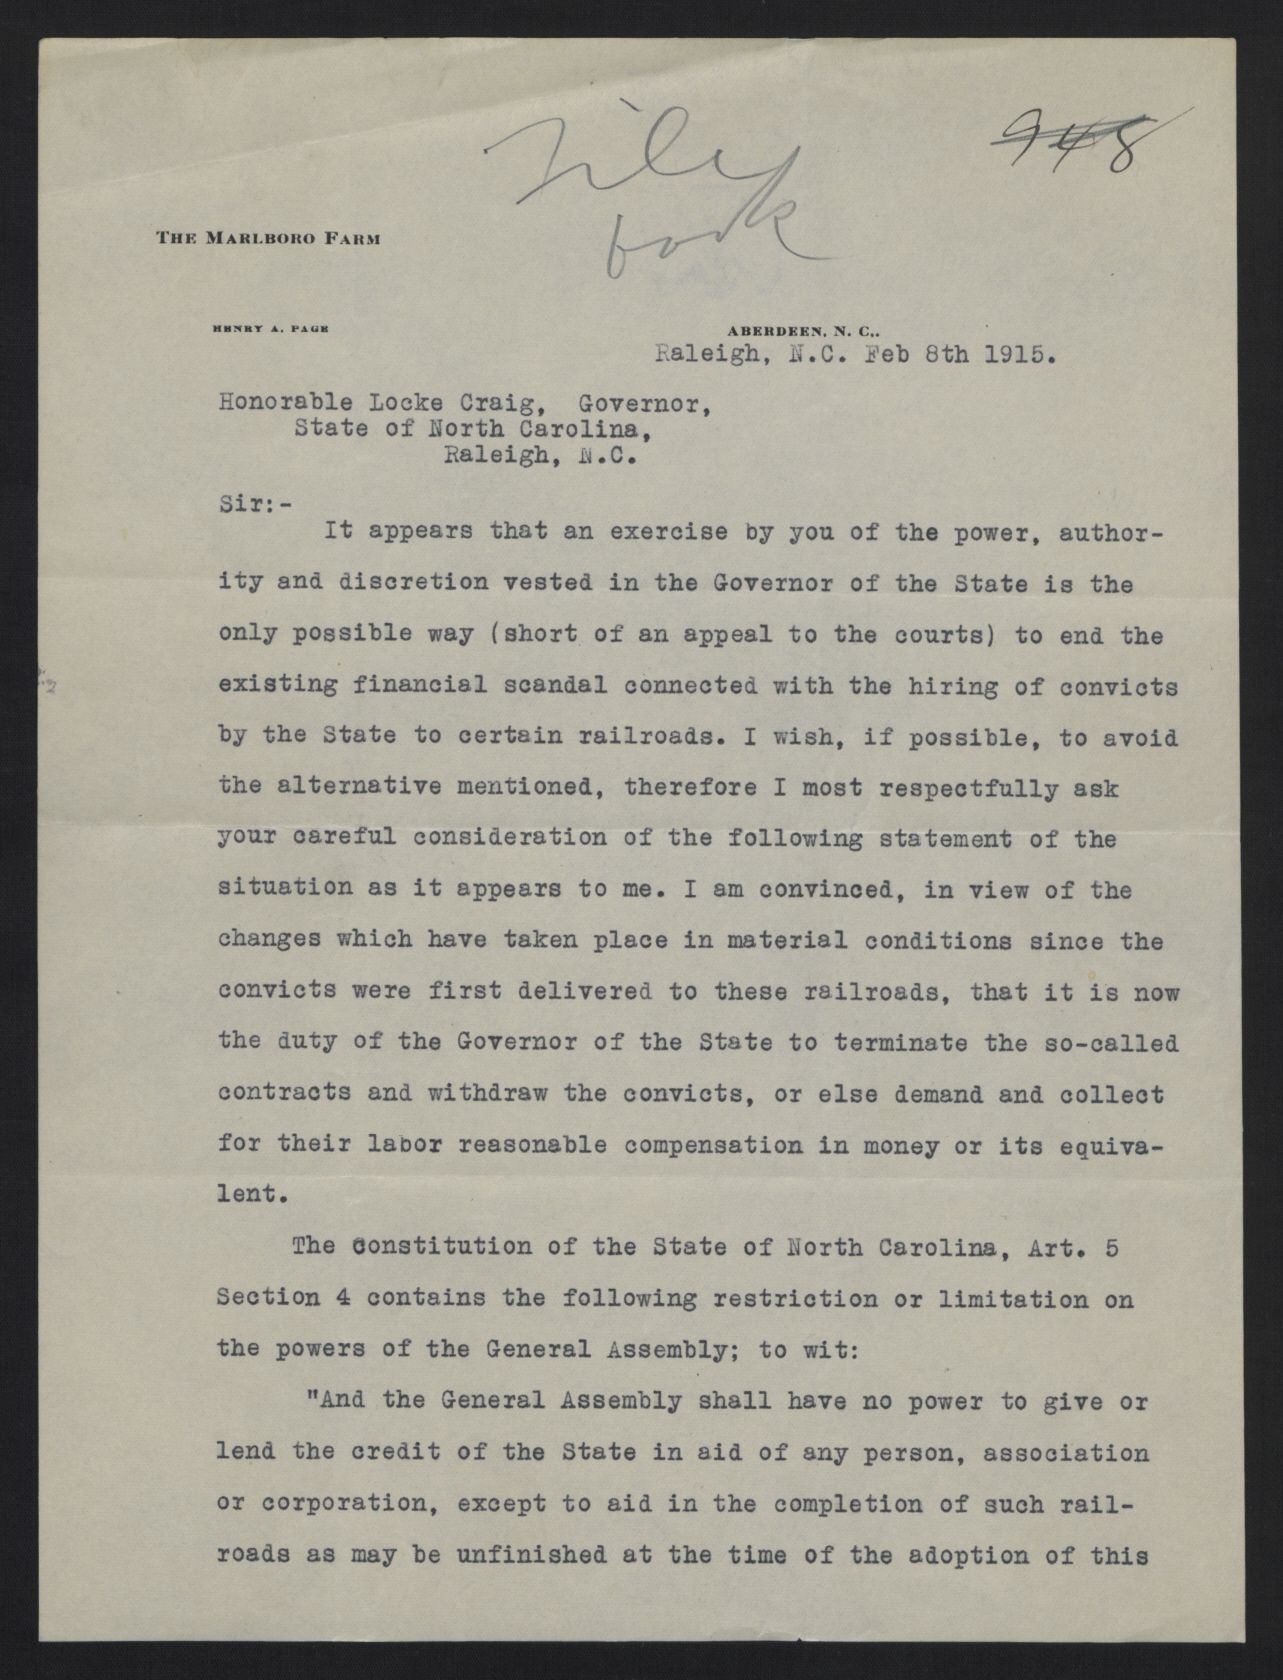 Letter from Page to Craig, February 8, 1915, page 1